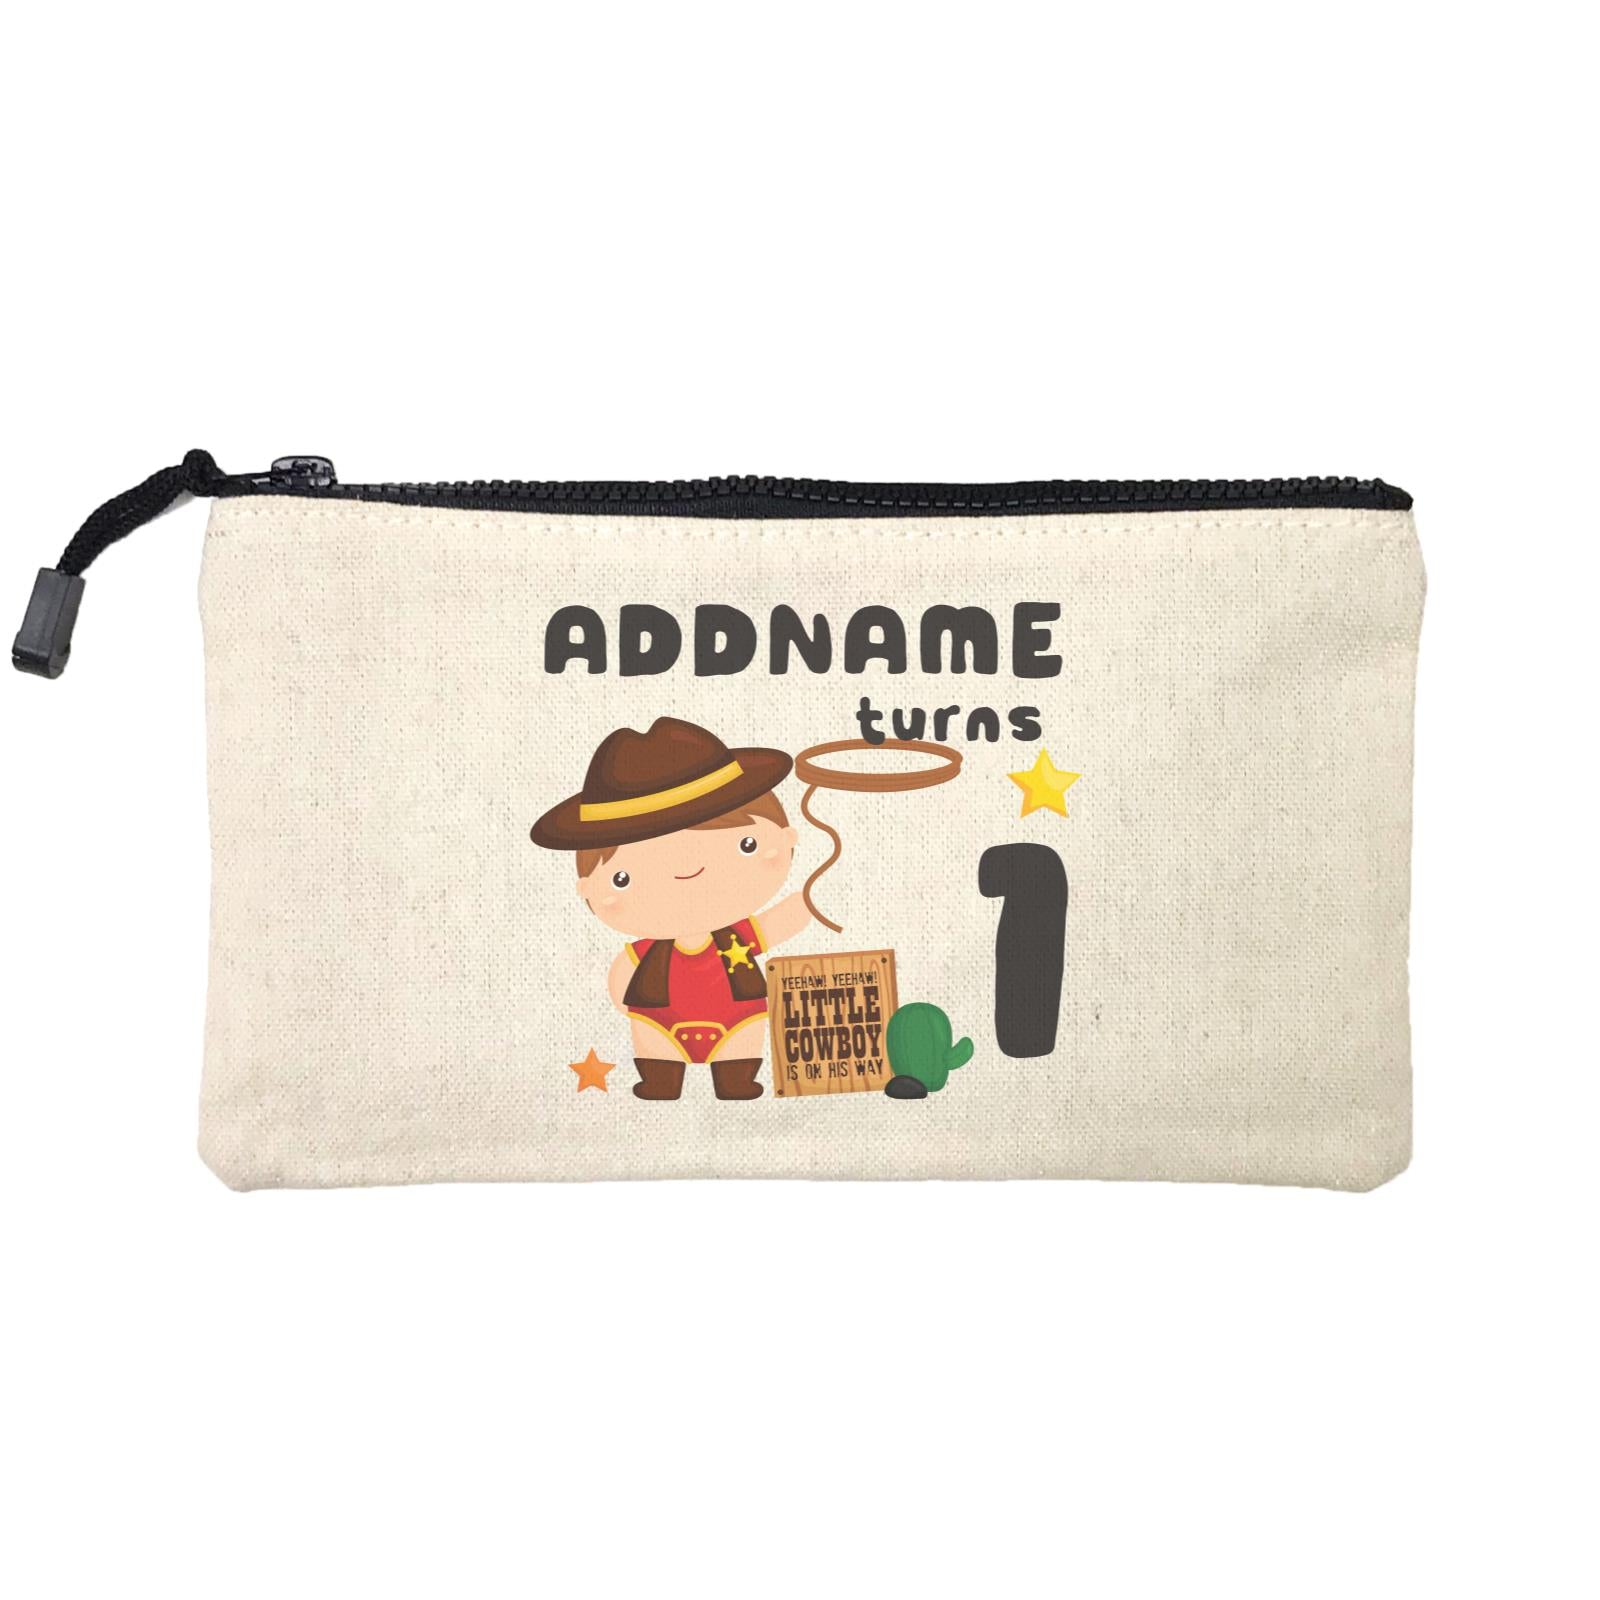 Birthday Cowboy Style Yeehaw Little Cowboy Is On His Way Addname Turns 1 Mini Accessories Stationery Pouch